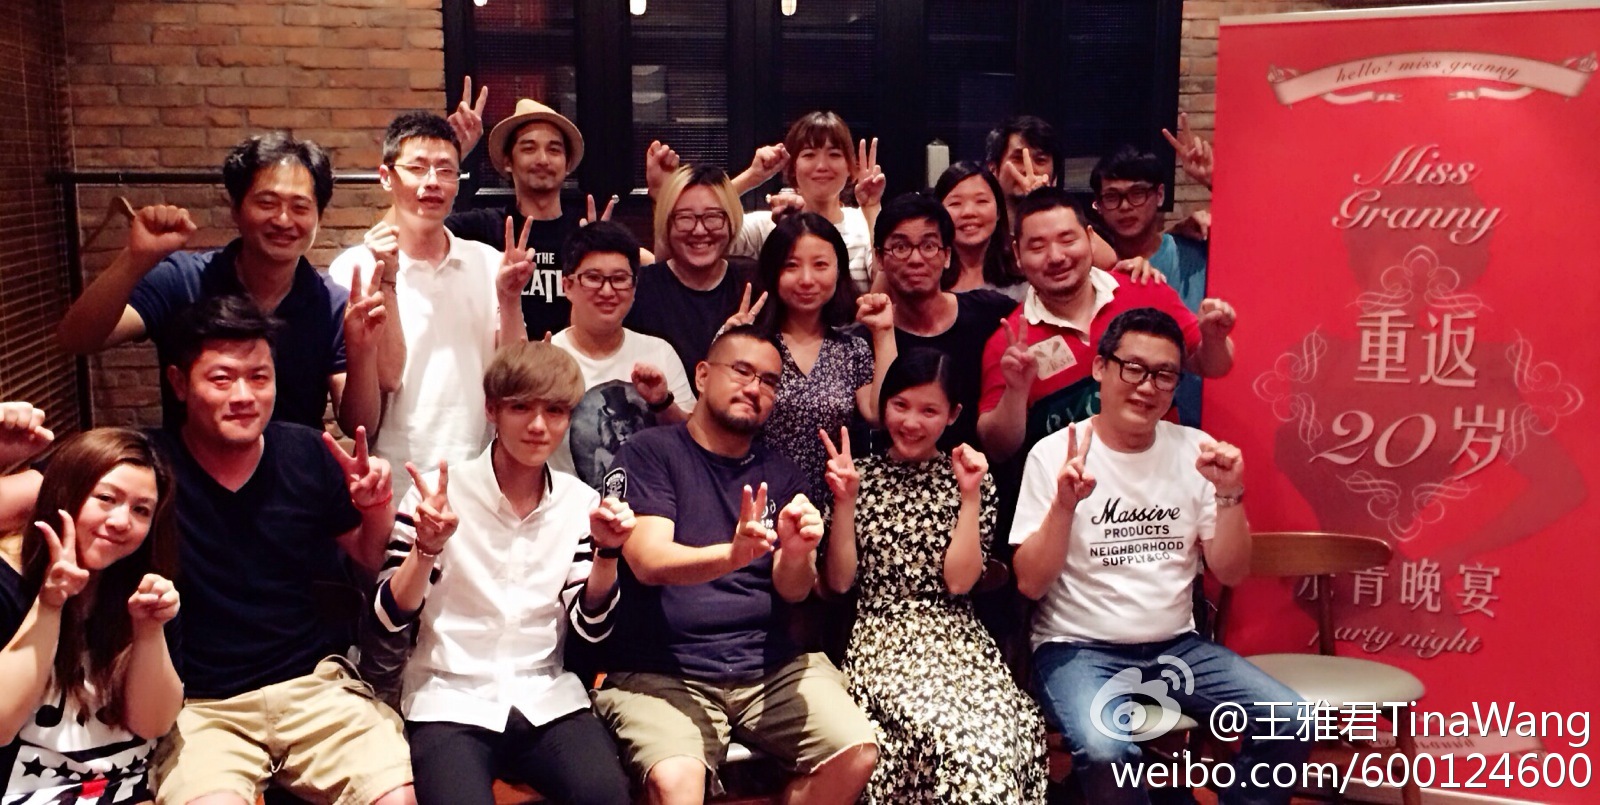 [OTHER] Luhan with Back to 20 cast and crew members [12P] 5c399ad6jw1eisxbwqsy5j218g0mdn7z